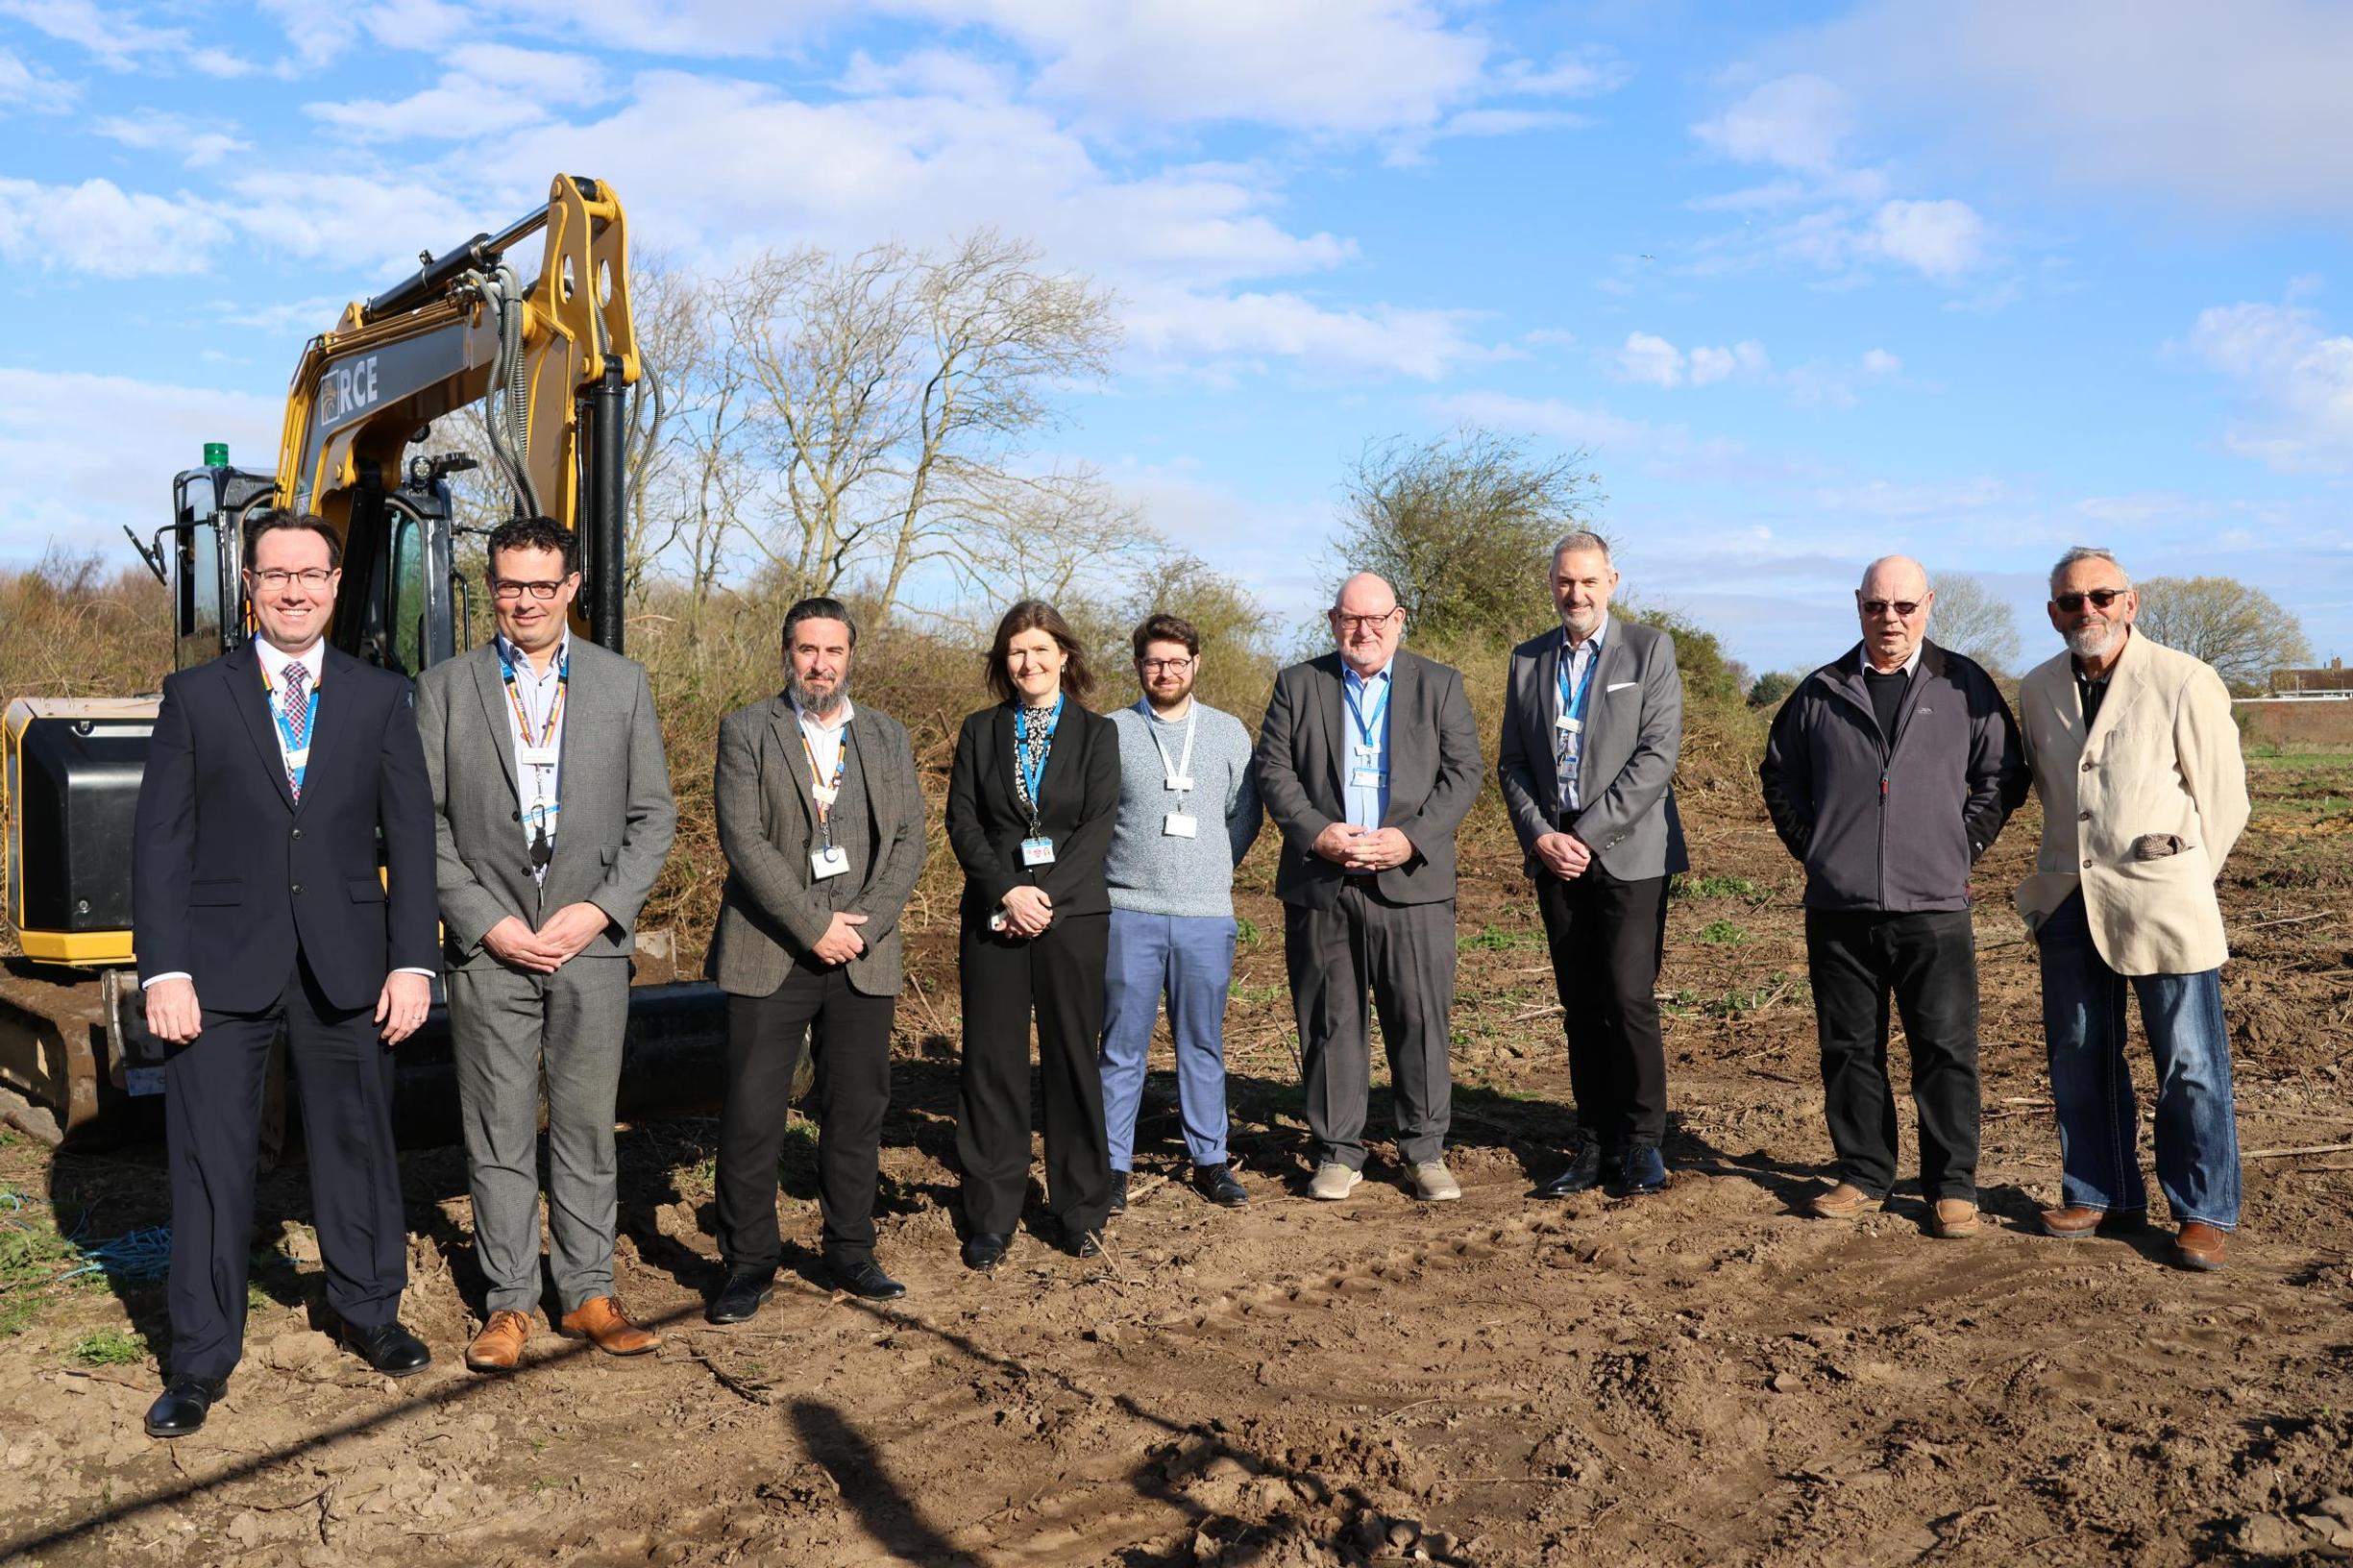 The James Paget Hospital and Gorleston & Great Yarmouth Allotment Association at the Potter’s Field site (L-R) Mark Flynn, director of strategic projects, JPUH; Jonathan Barber, deputy CEO, JPUH; Steven Balls, deputy director of estates and facilities; Diane Goodwin, operations director, Future Paget Programme, JPUH; Harry Hicks, project manager, Future Paget Programme, JPUH; Jim Hackett, programme director, Future Paget Programme, JPUH; Richard Varvel, project manager, estates, JPUH; Alan Peace, GGYAA; and David Cardall, GGYAA